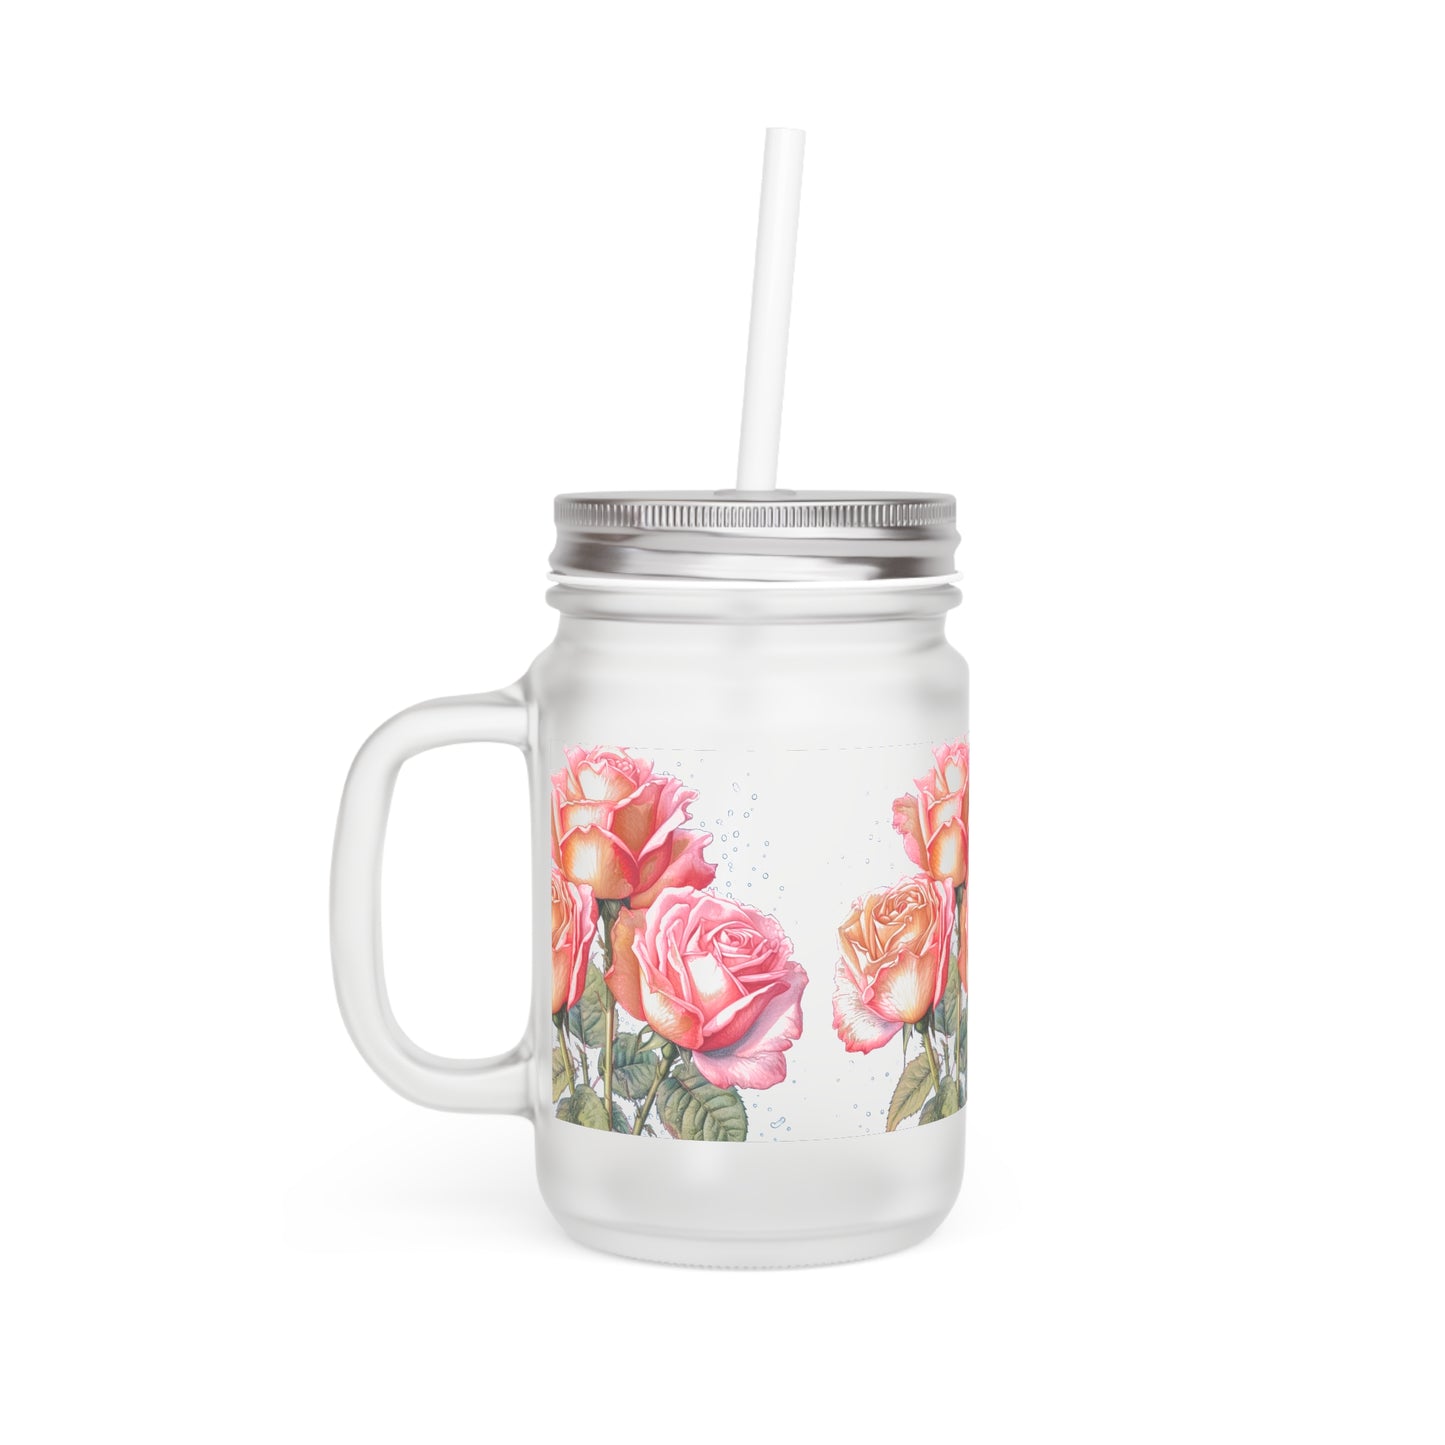 Artisanal Frosted Mason Jar All Over Embellished with Soft Pink Roses